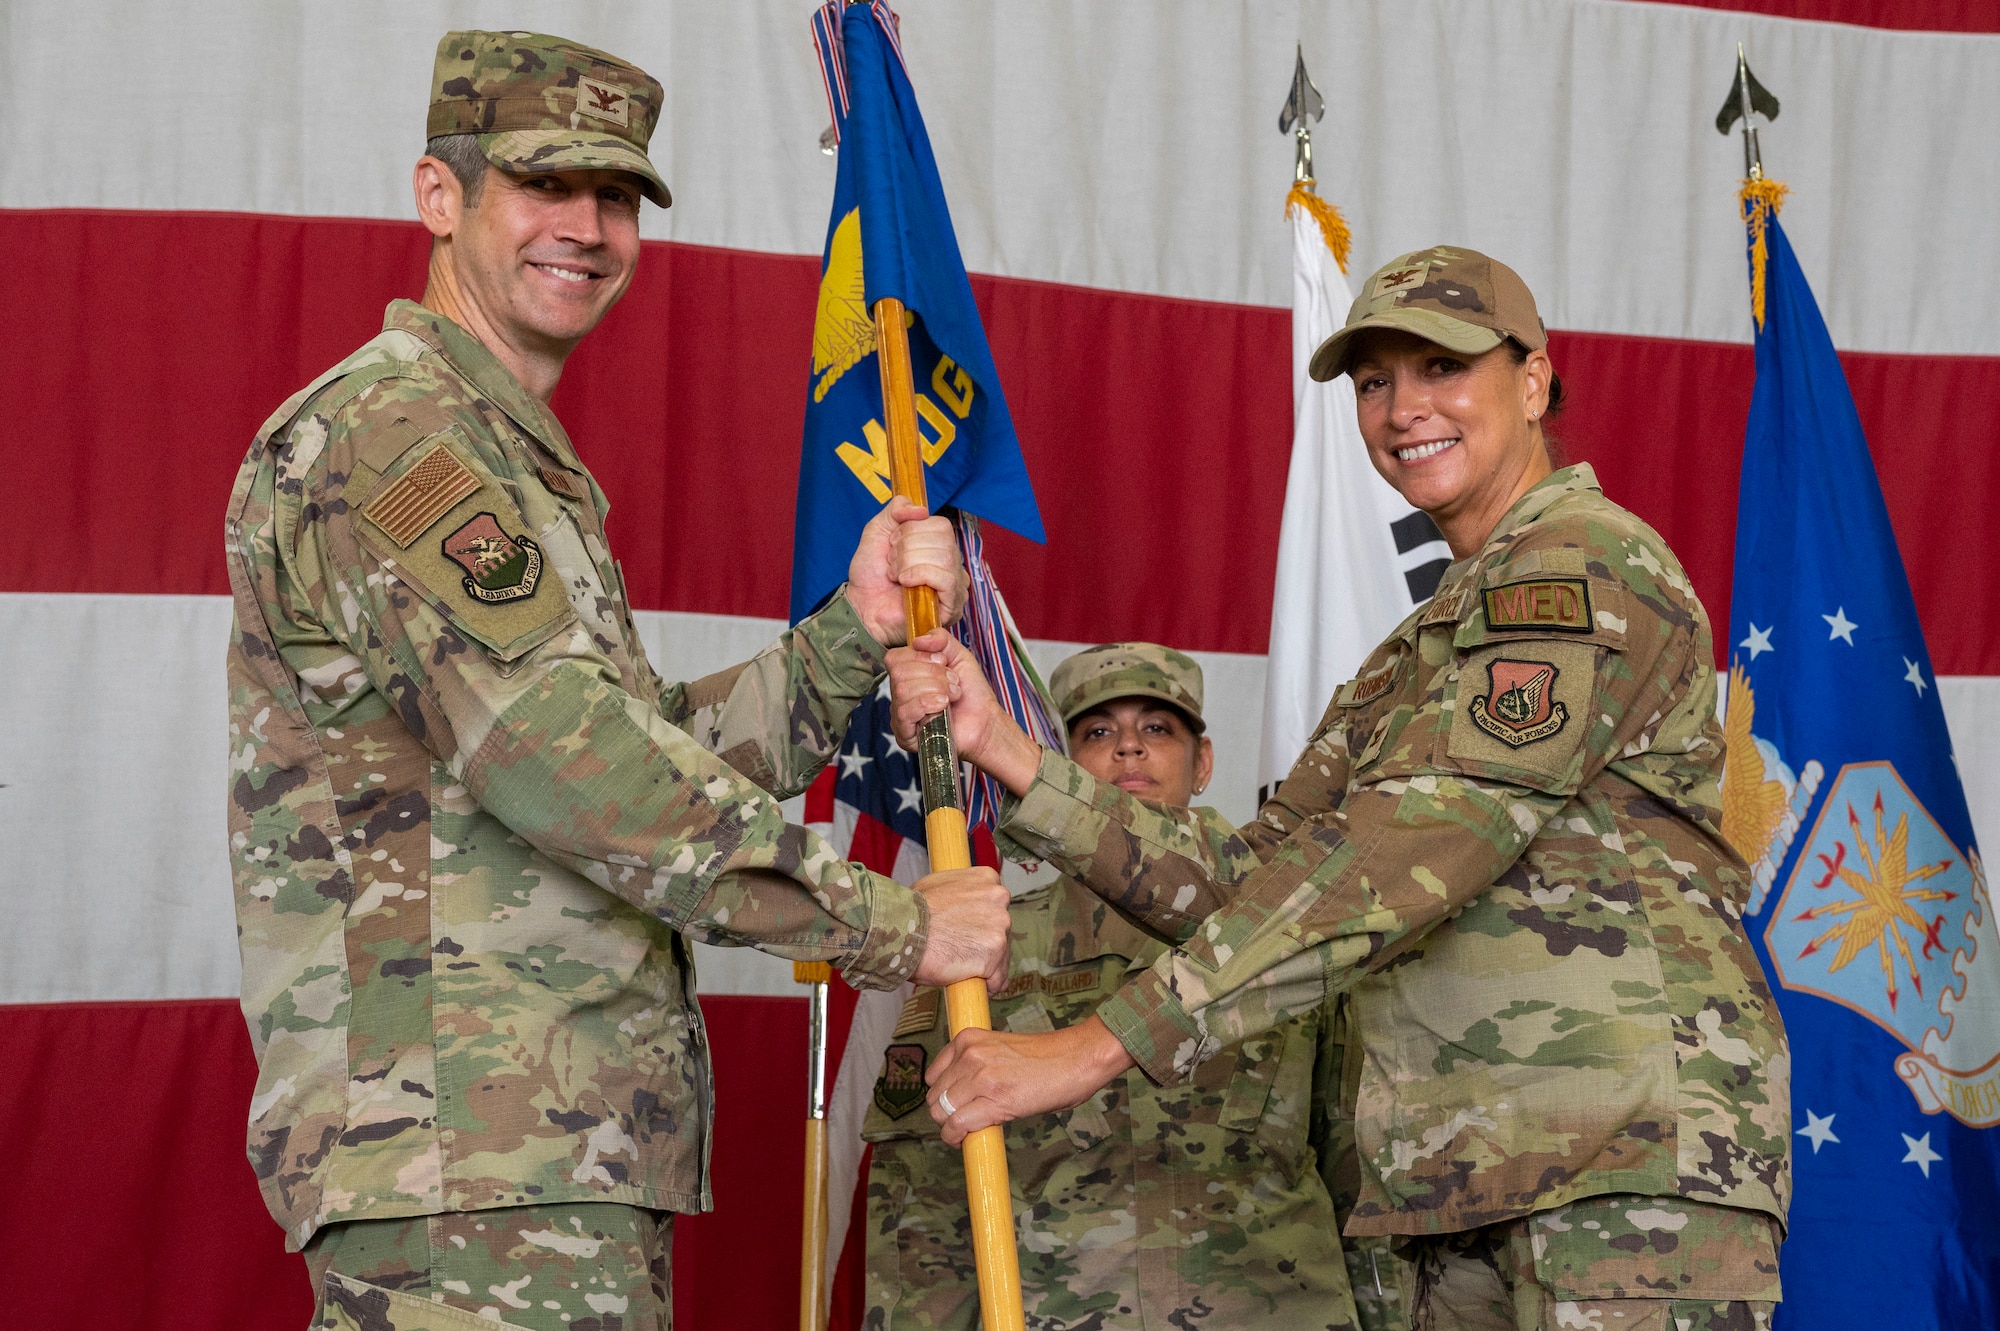 U.S. Air Force Col. William McKibban, left, 51st Fighter Wing commander, presents the guidon to Col. Mocha Robinson 51st Medical Group incoming commander, as a symbol of her taking command at Osan Air Base, Republic of Korea, July 12, 2023. Prior to taking command, Robinson served as chief, medical manpower and personnel division, office of the Air Force surgeon general, Falls Church, Virgina. (U.S. Air Force photo by Senior Airman Aaron Edwards)